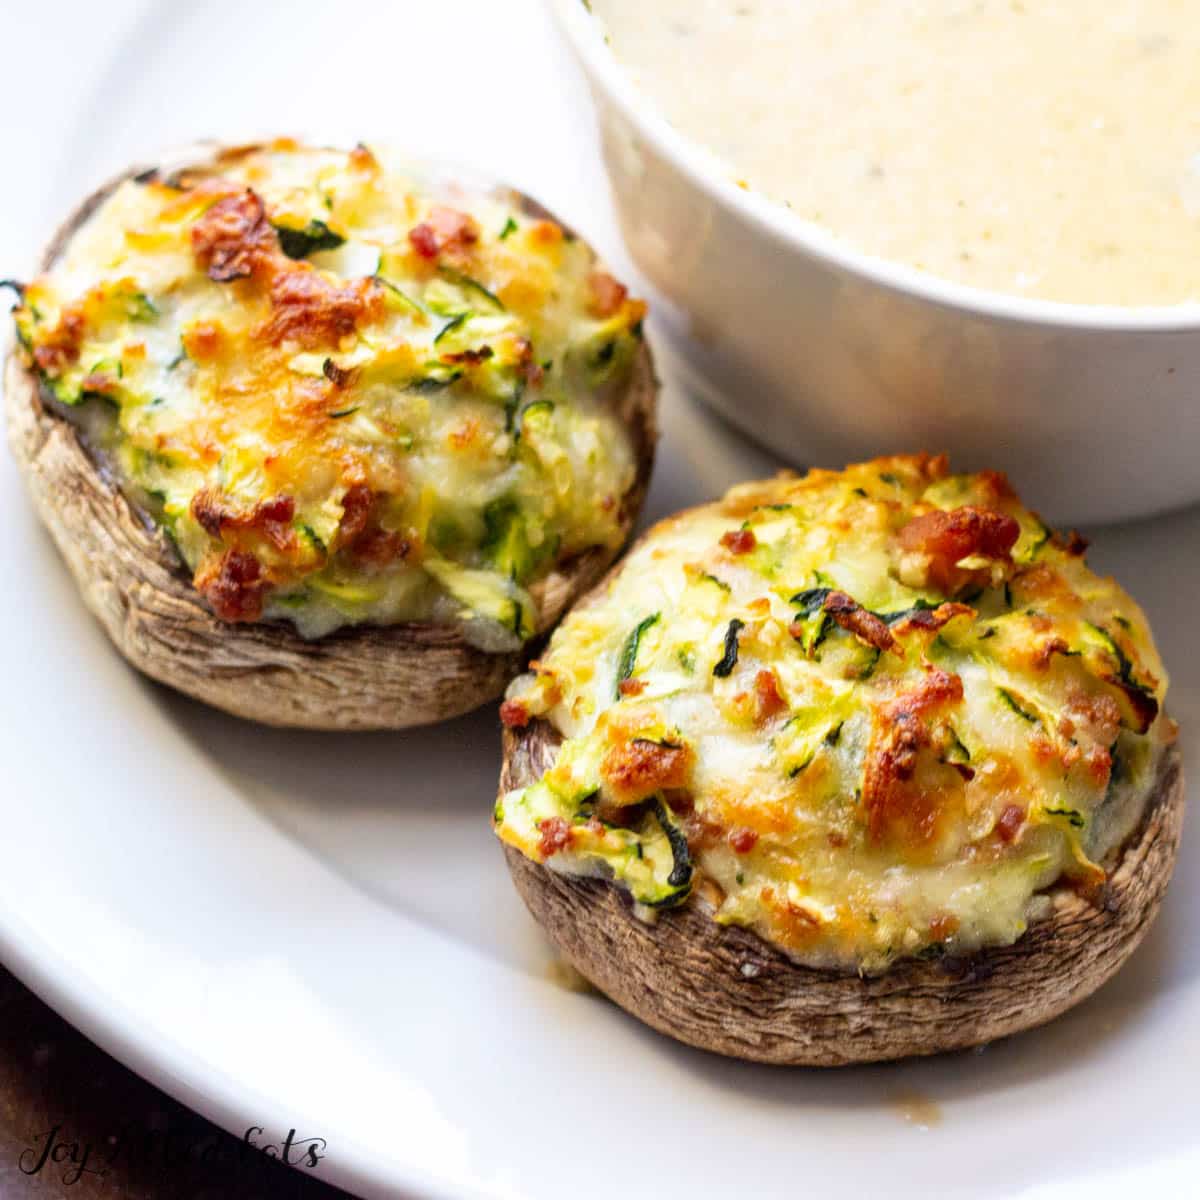 Bacon and Cheese Stuffed Mushrooms served on a plate with a bowl of soup